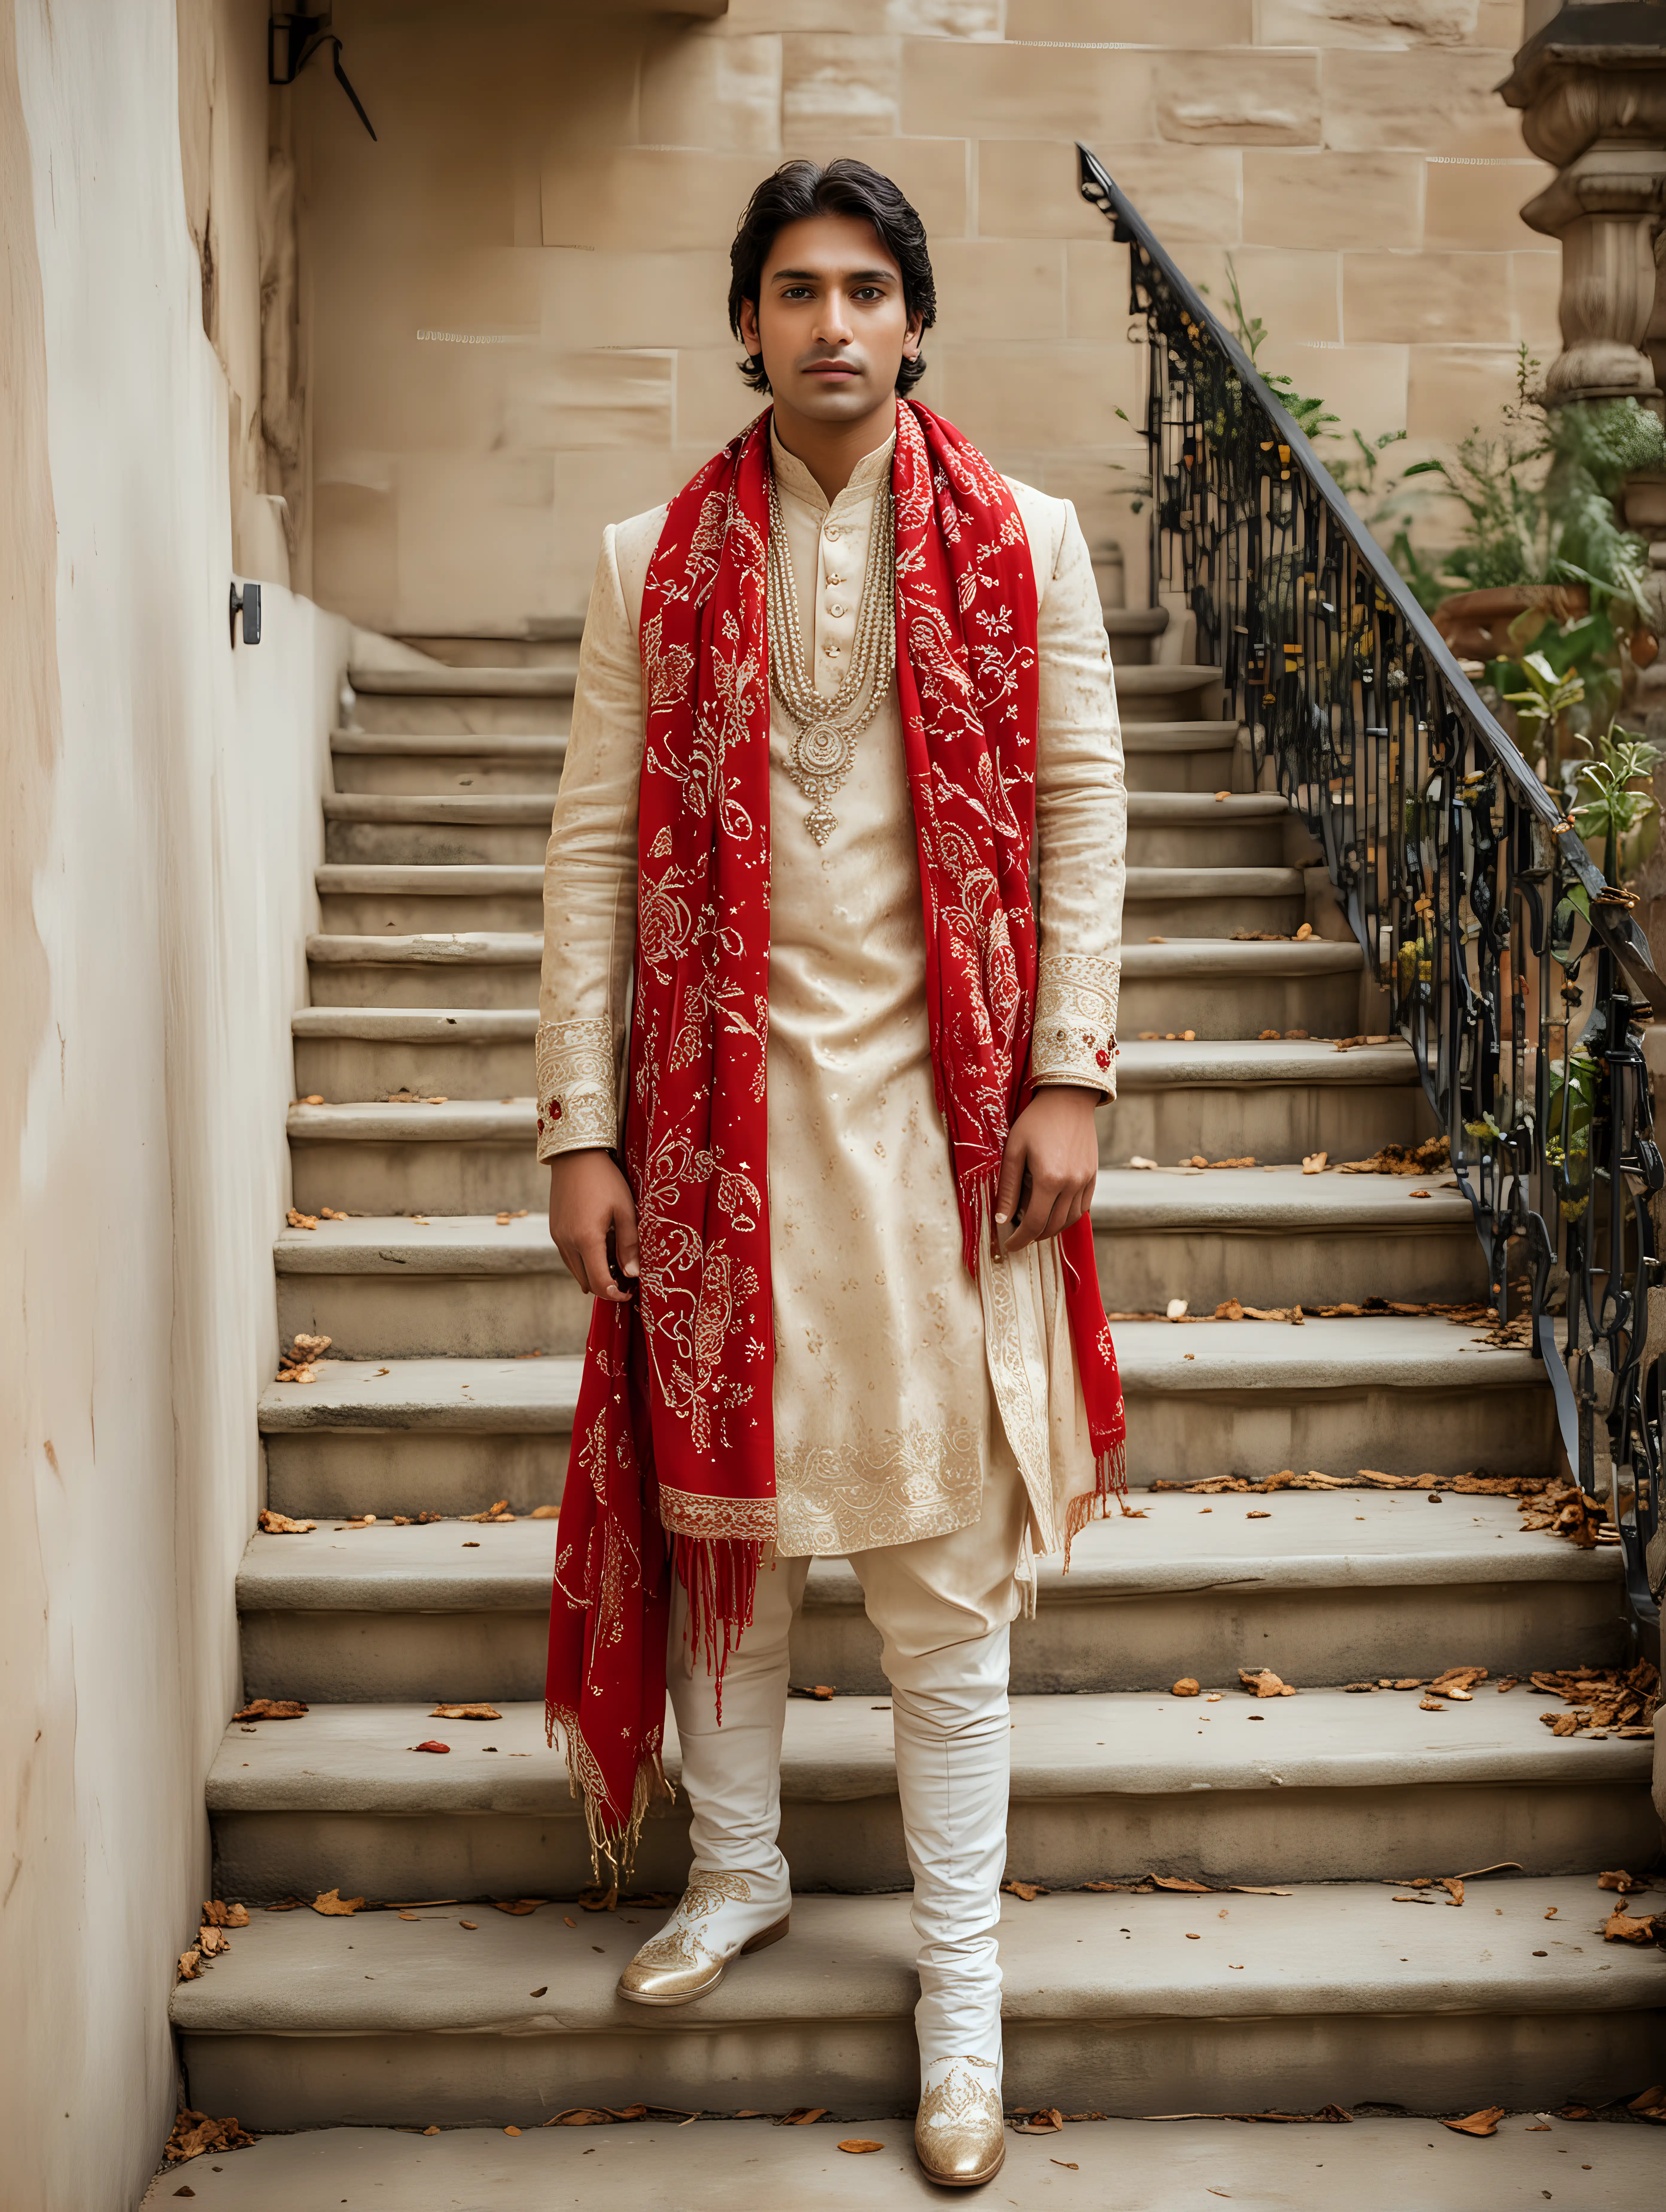 Young Indian Groom in Vibrant Wedding Attire Poses by Colorful Stone Staircase